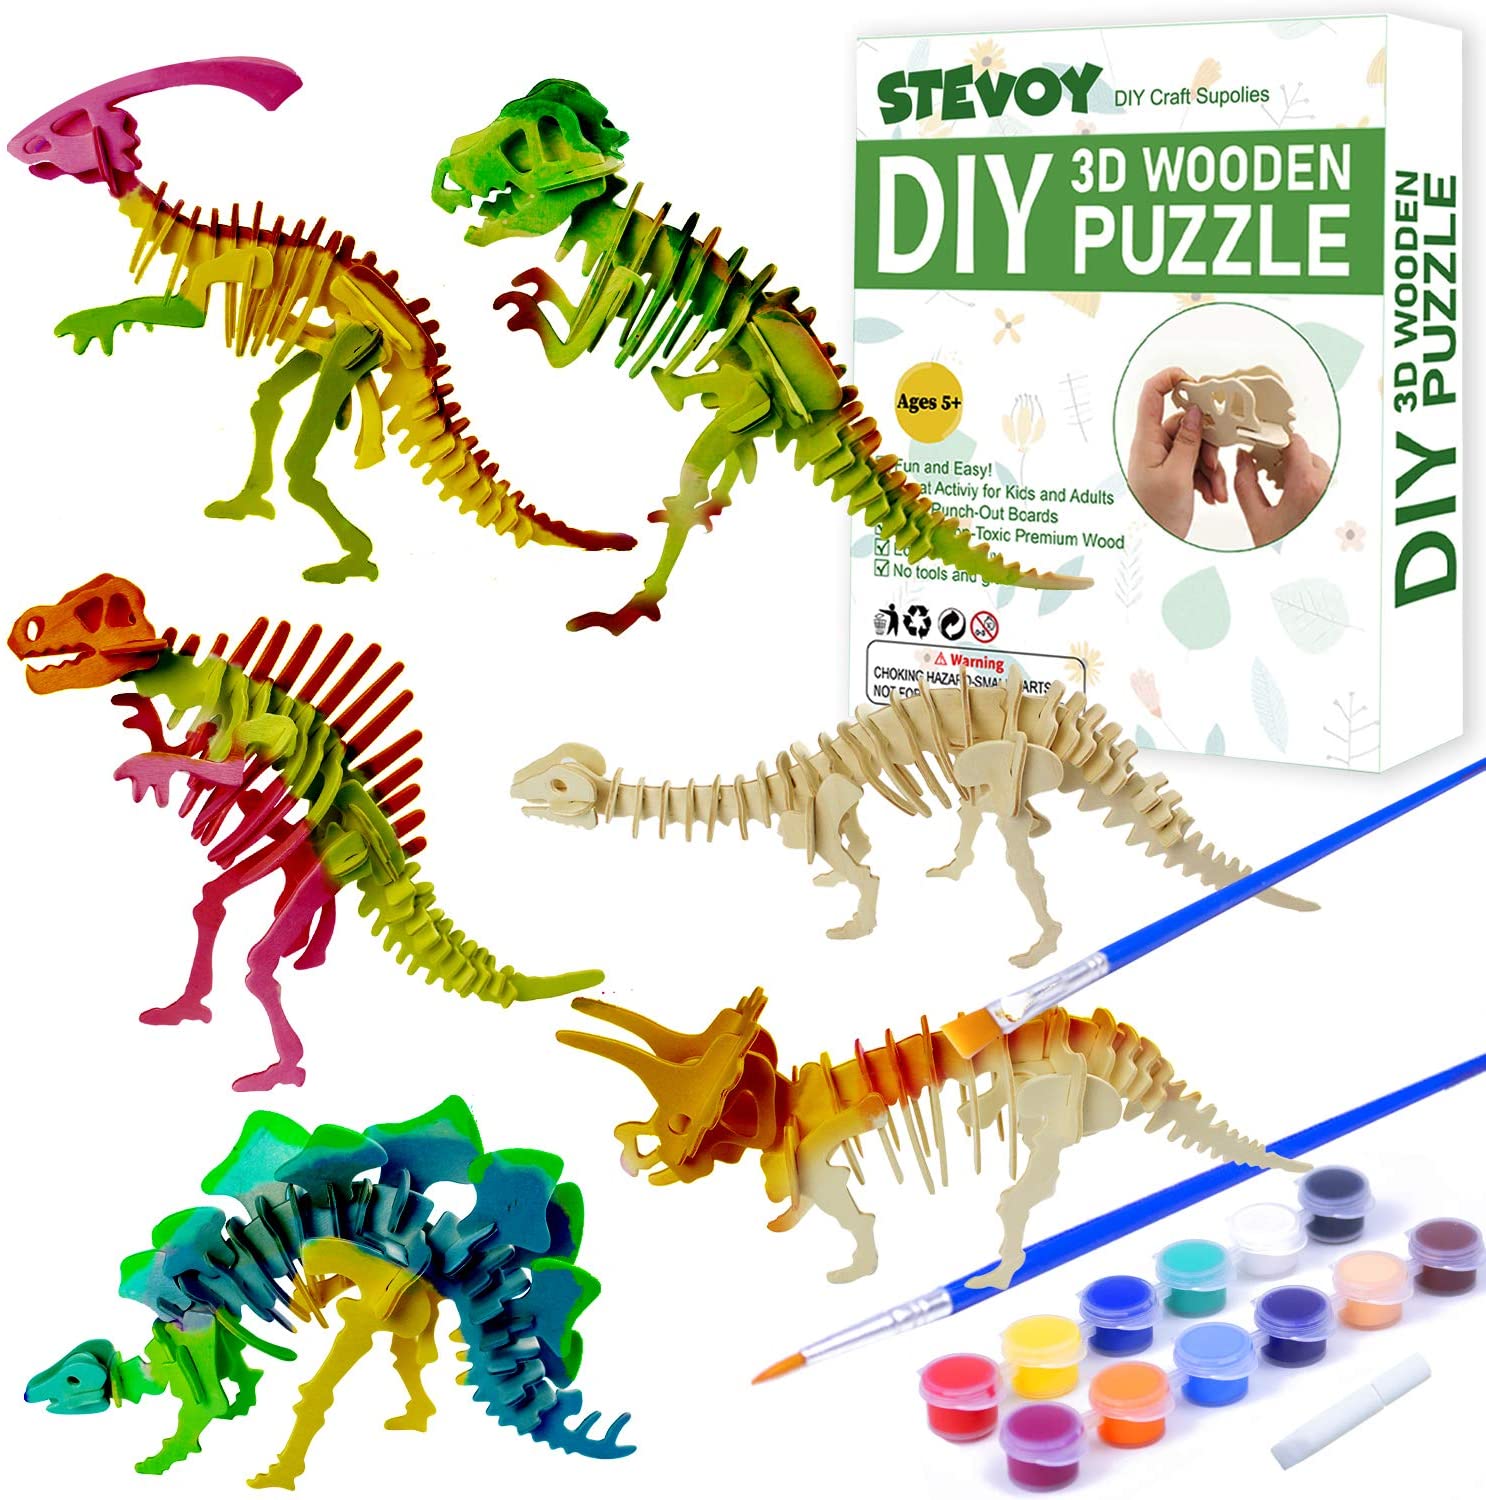 rowood-3d-puzzles-for-adults-kids-diy-wooden-model-kits-gift-on